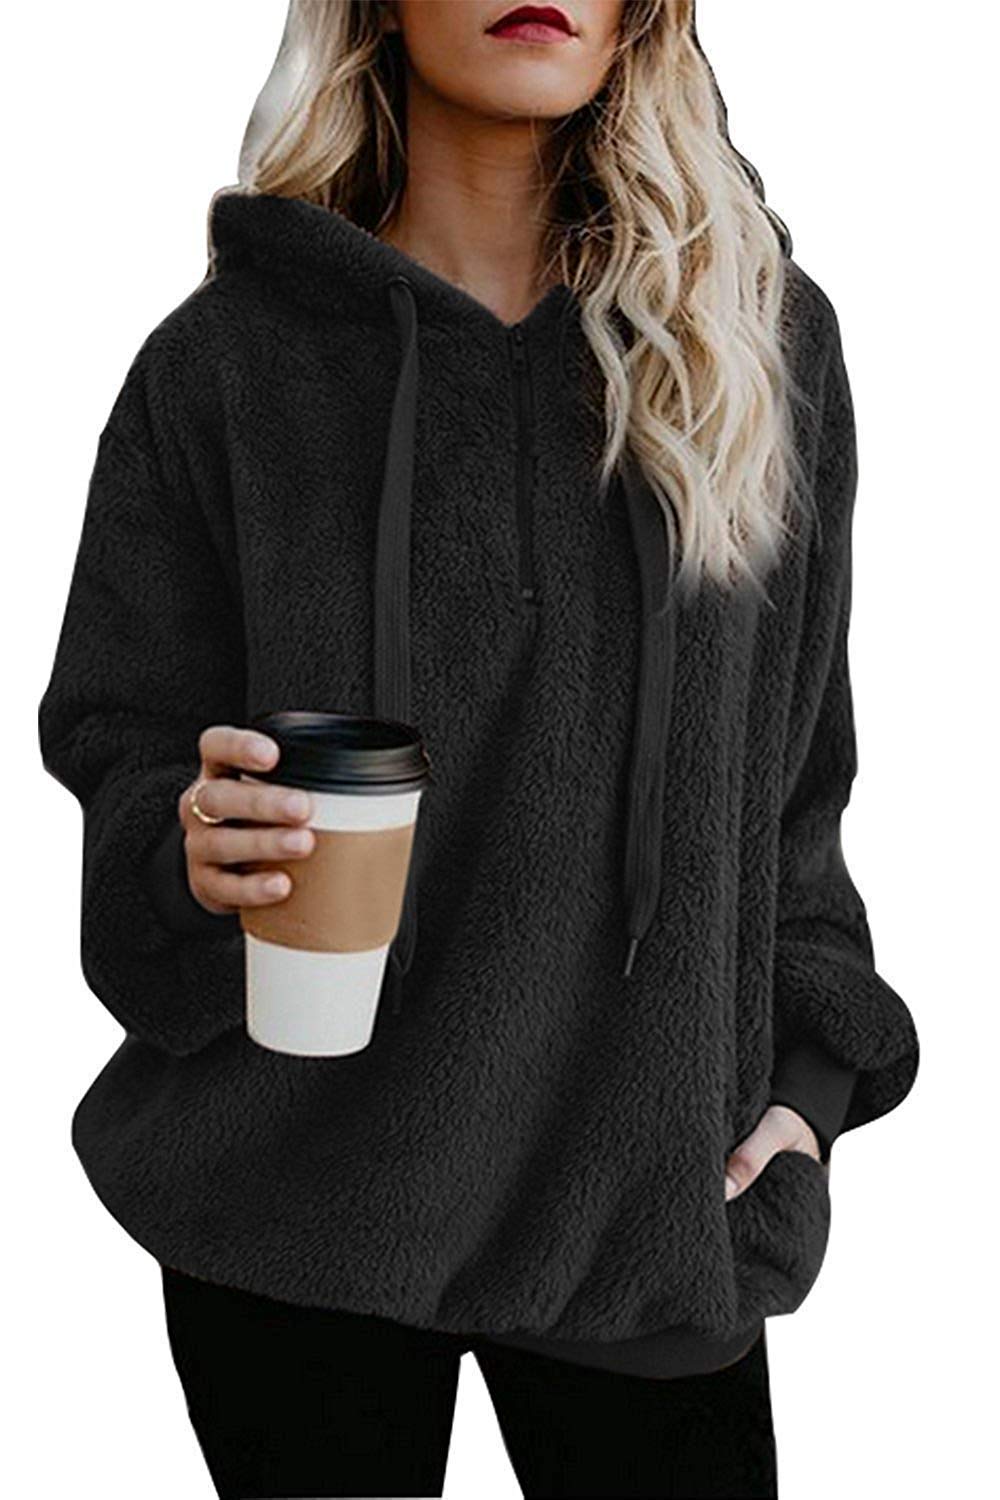 Book Cover ReachMe Womens Oversized Sherpa Pullover Hoodie with Pockets Fuzzy Fleece Sweatshirt Tie Dye Fluffy Coat Small A Black